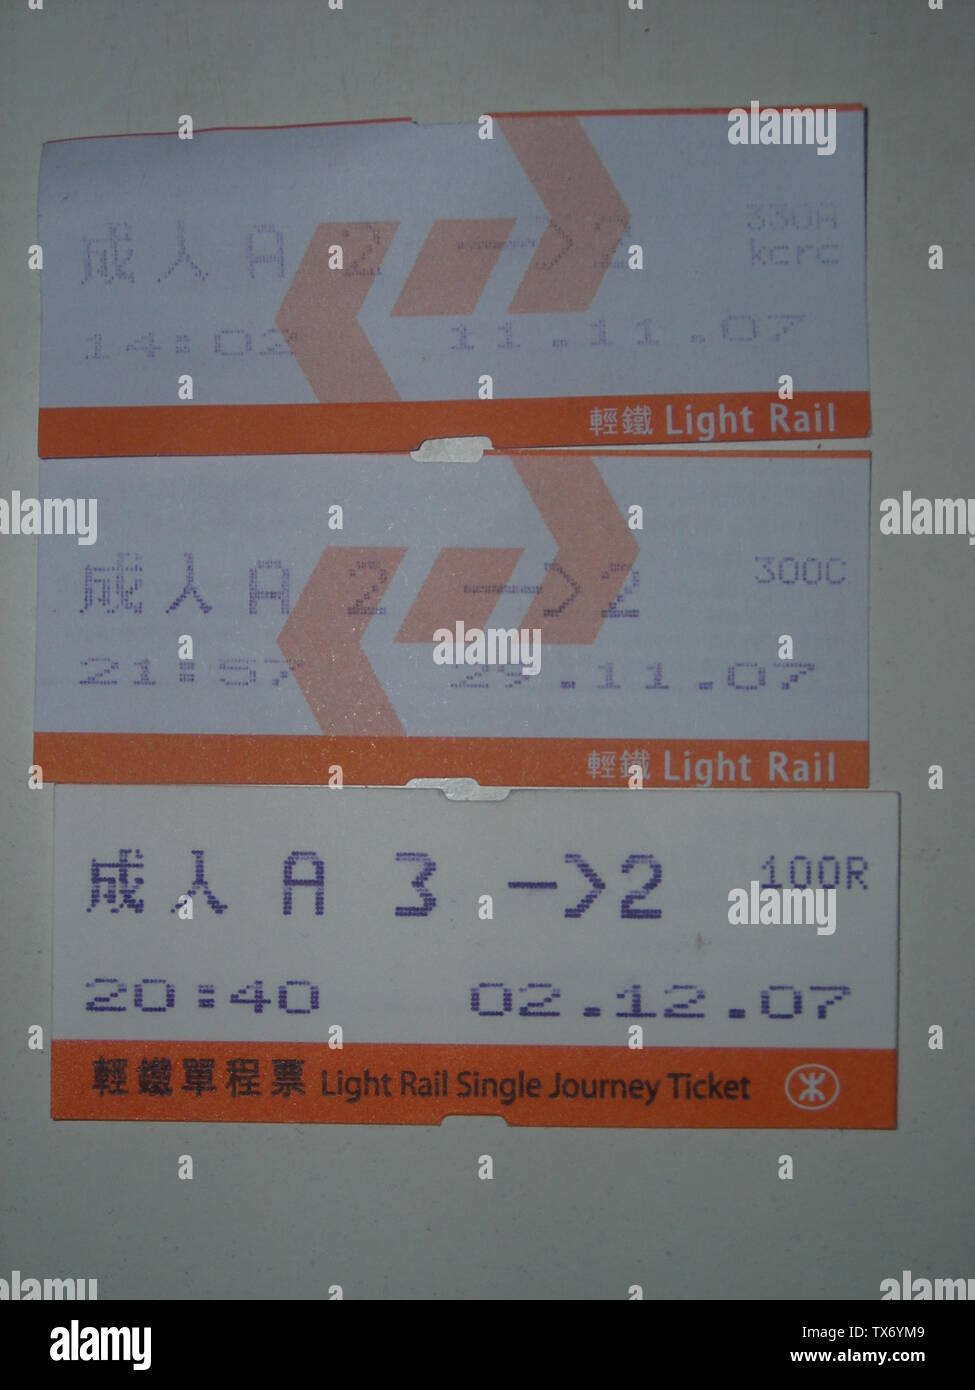 A Ae E E µa C E Sc Tickets Of Kcr And Later Mtr Light Rail 13 December 07 Transferred From Zh Pedia To Commons By Altt311 Using Commonshelper The Original Uploader Was Tksteven At Chinese Pedia Stock Photo